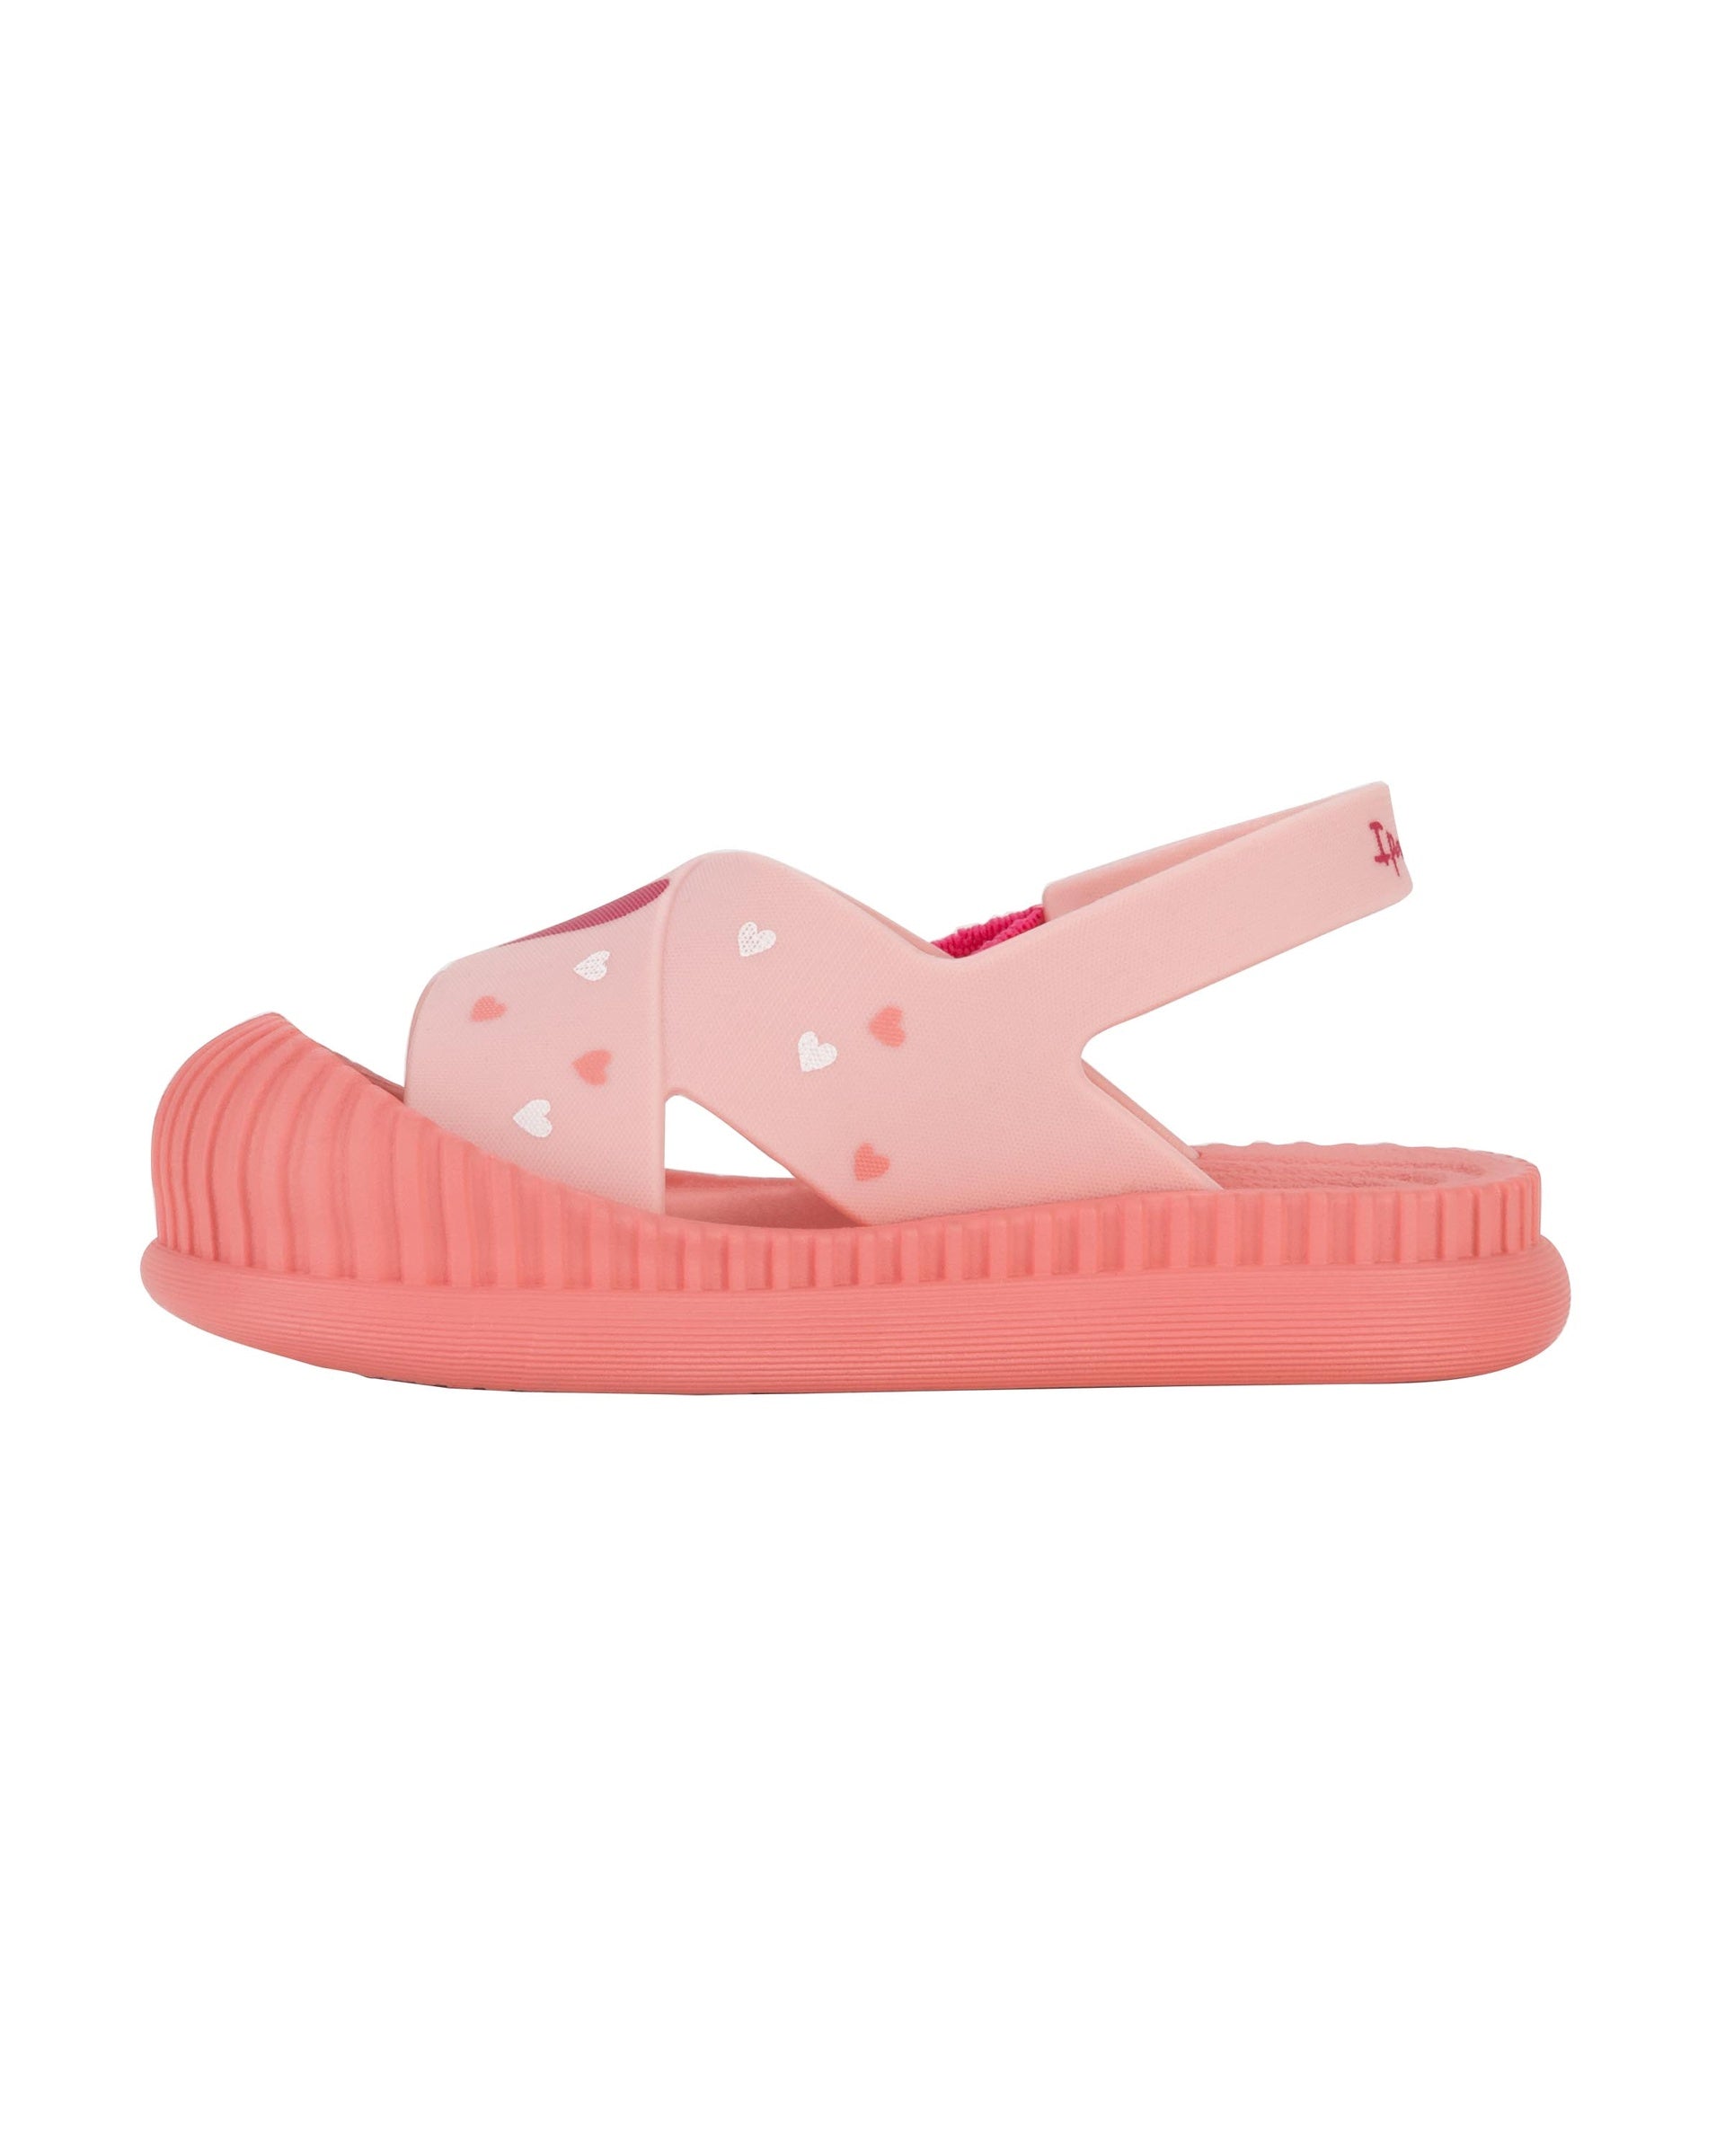 Inner side view of a pink Ipanema Cute baby sandal with hearts on the strap.